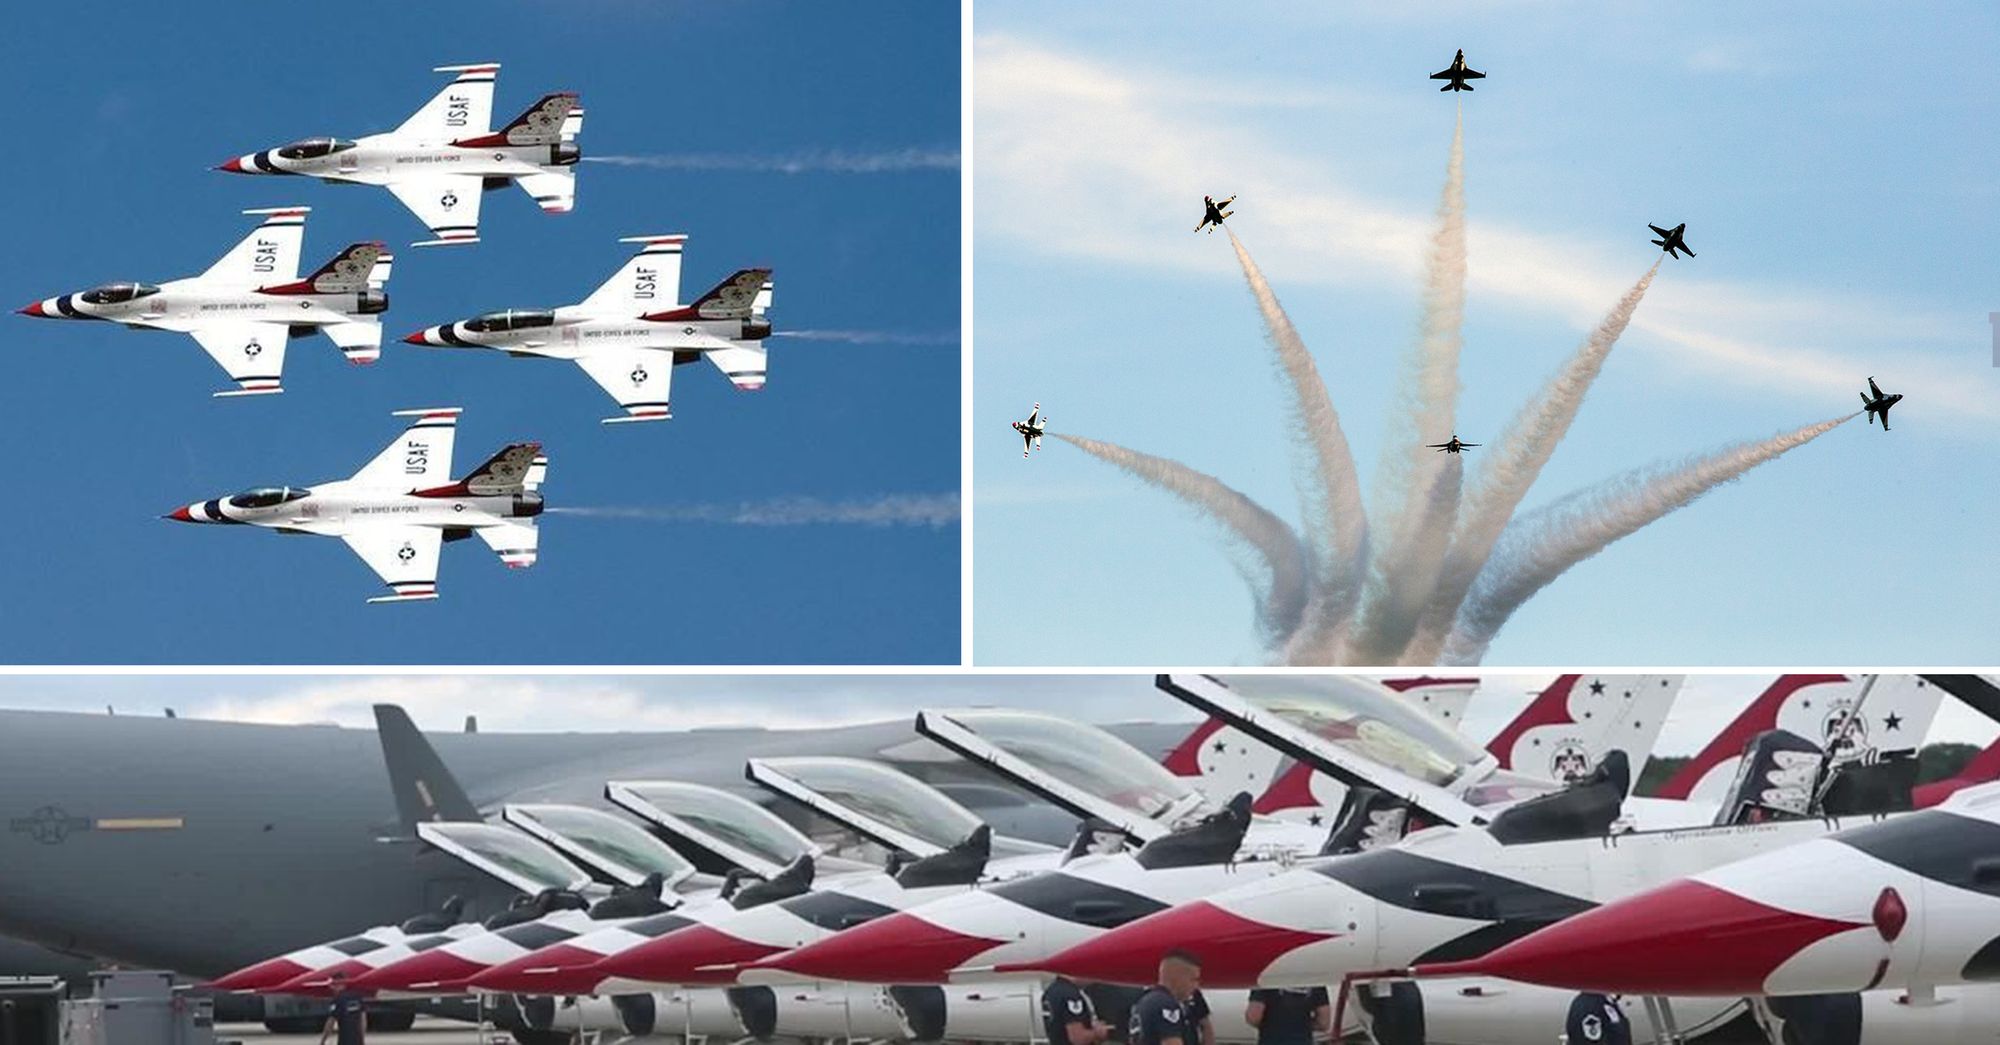 USAF Thunderbirds Will Be Flying High Over F.E. Warren Air Force Base This Year!